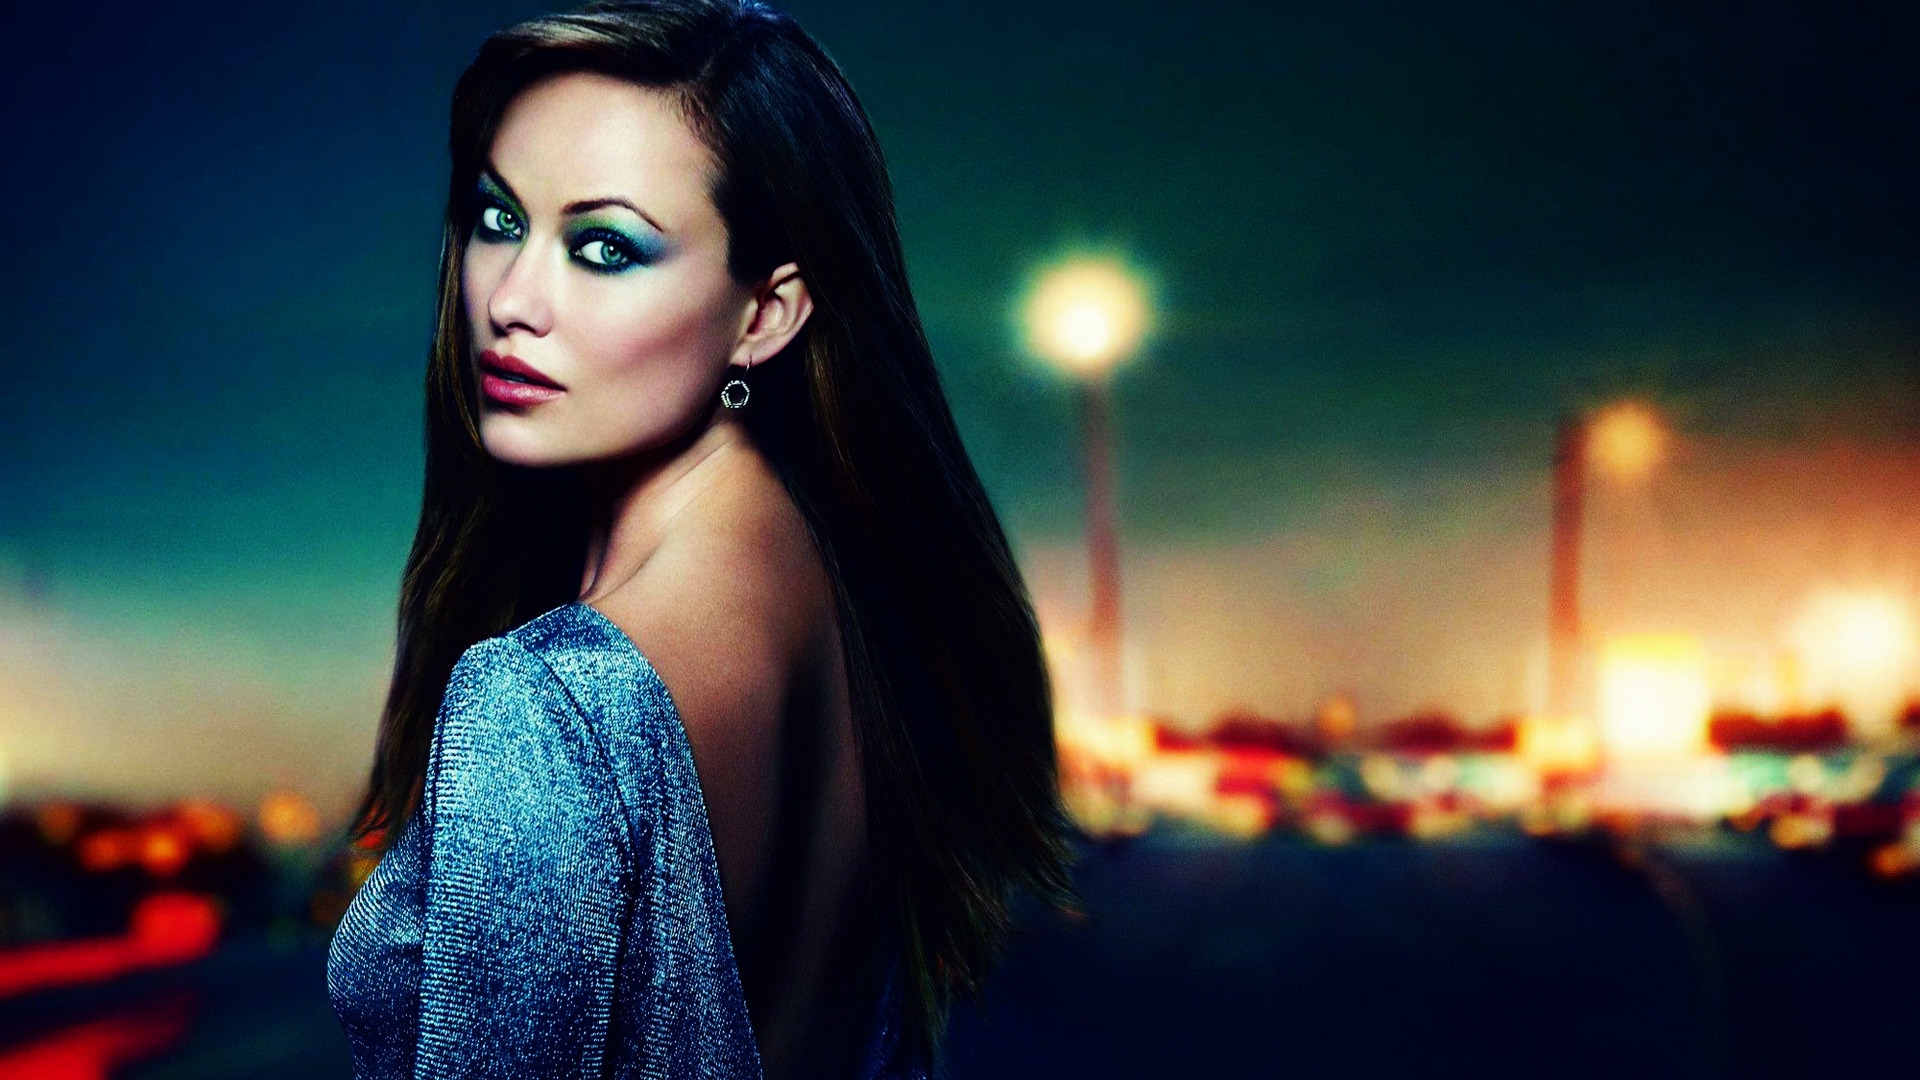 Olivia Wilde Profile Look for 1920 x 1080 HDTV 1080p resolution